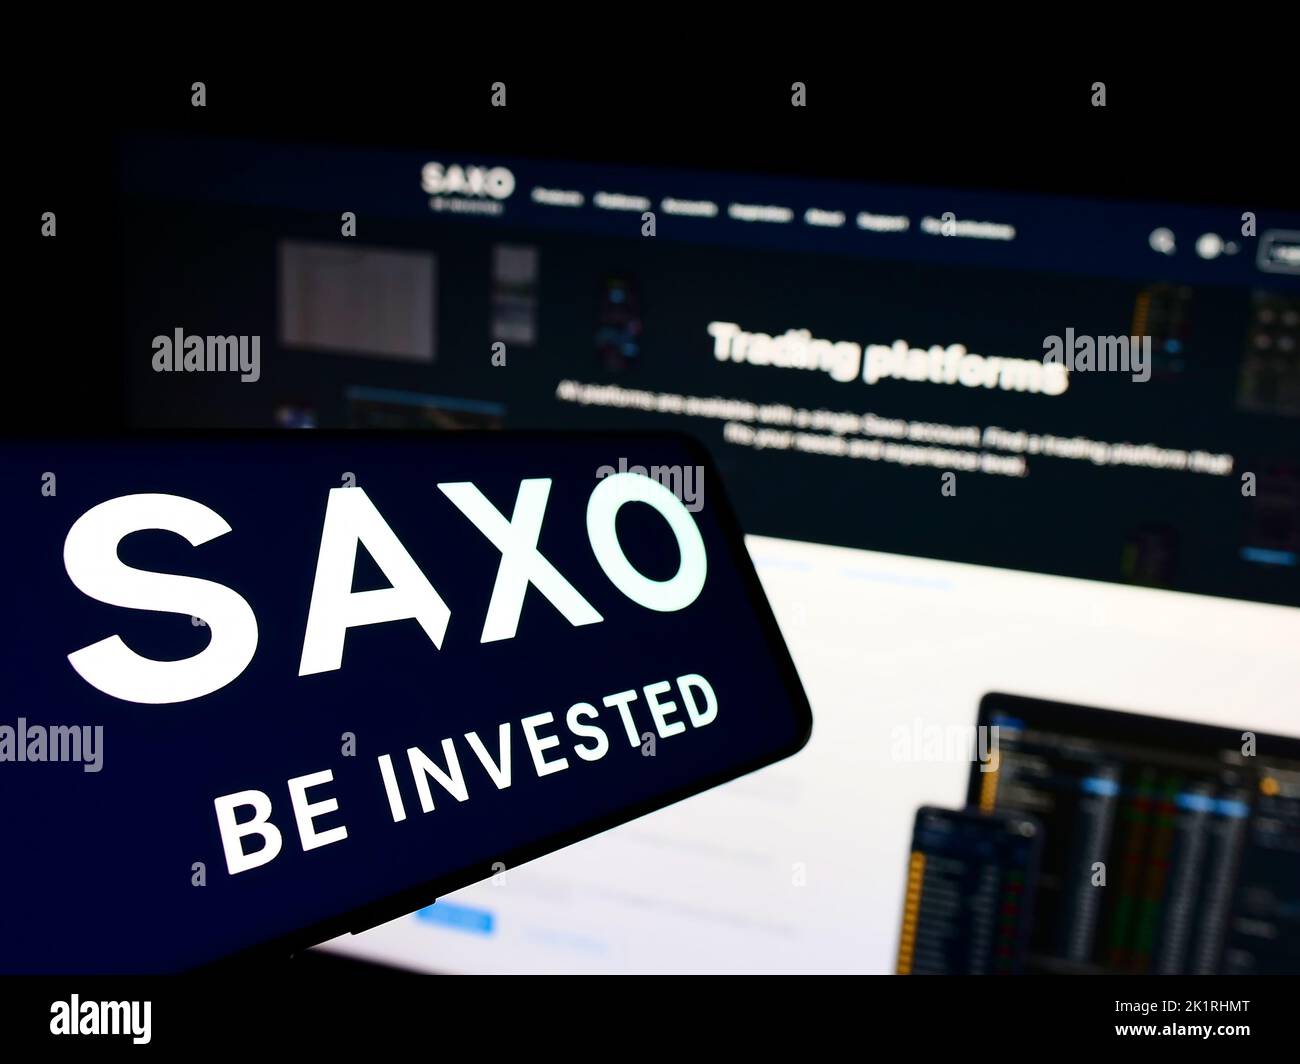 Cellphone with logo of Danish investment banking company Saxo Bank AS on screen in front of business website. Focus on center of phone display. Stock Photo